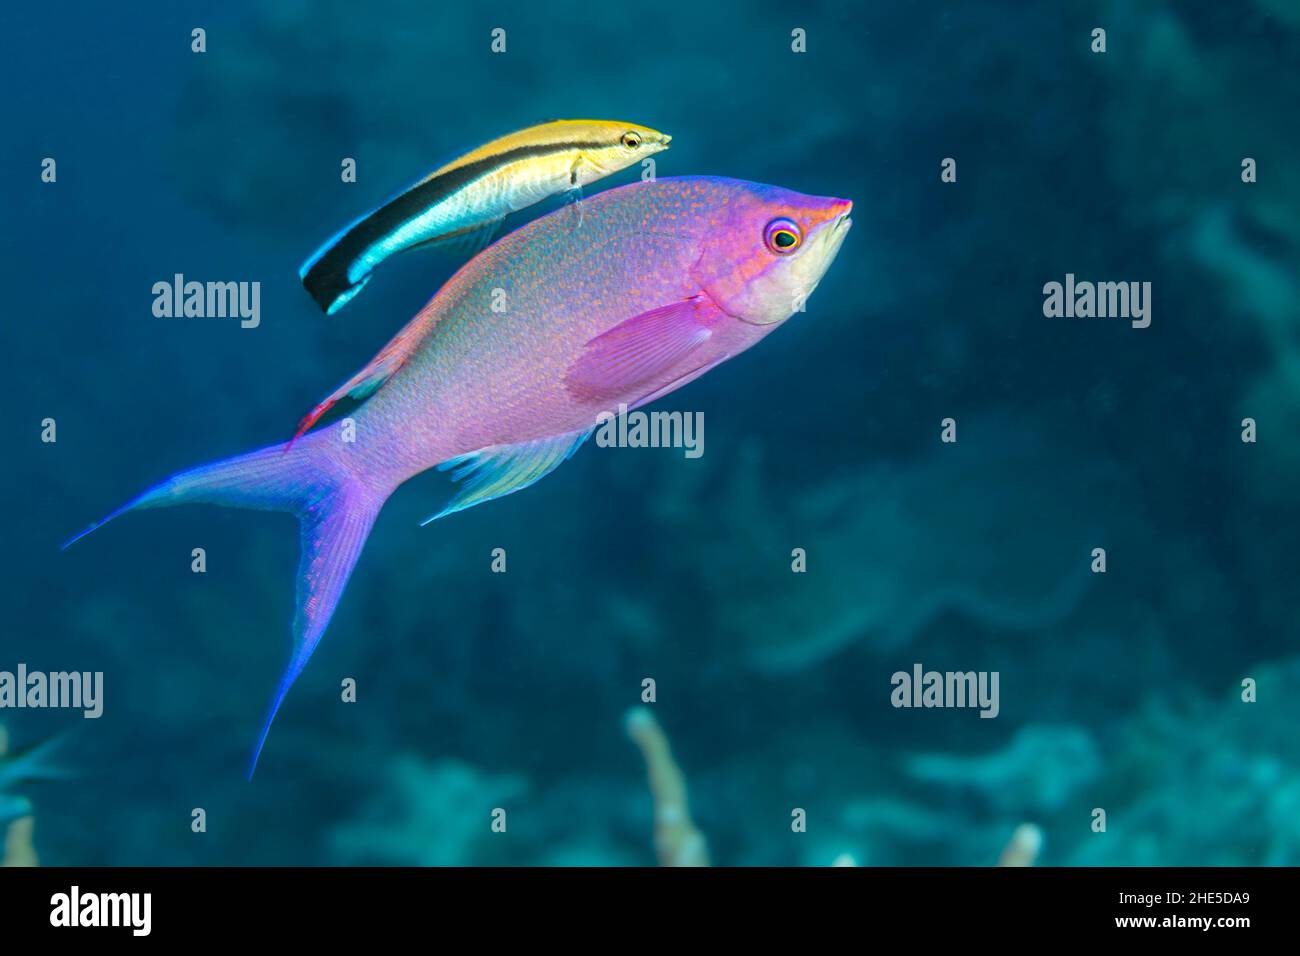 This is the terminal male stage of the purple queen anthias, Pseudanthias pascalus, which are sometimes referred to as Amethyst anthias, Yap, Federate Stock Photo